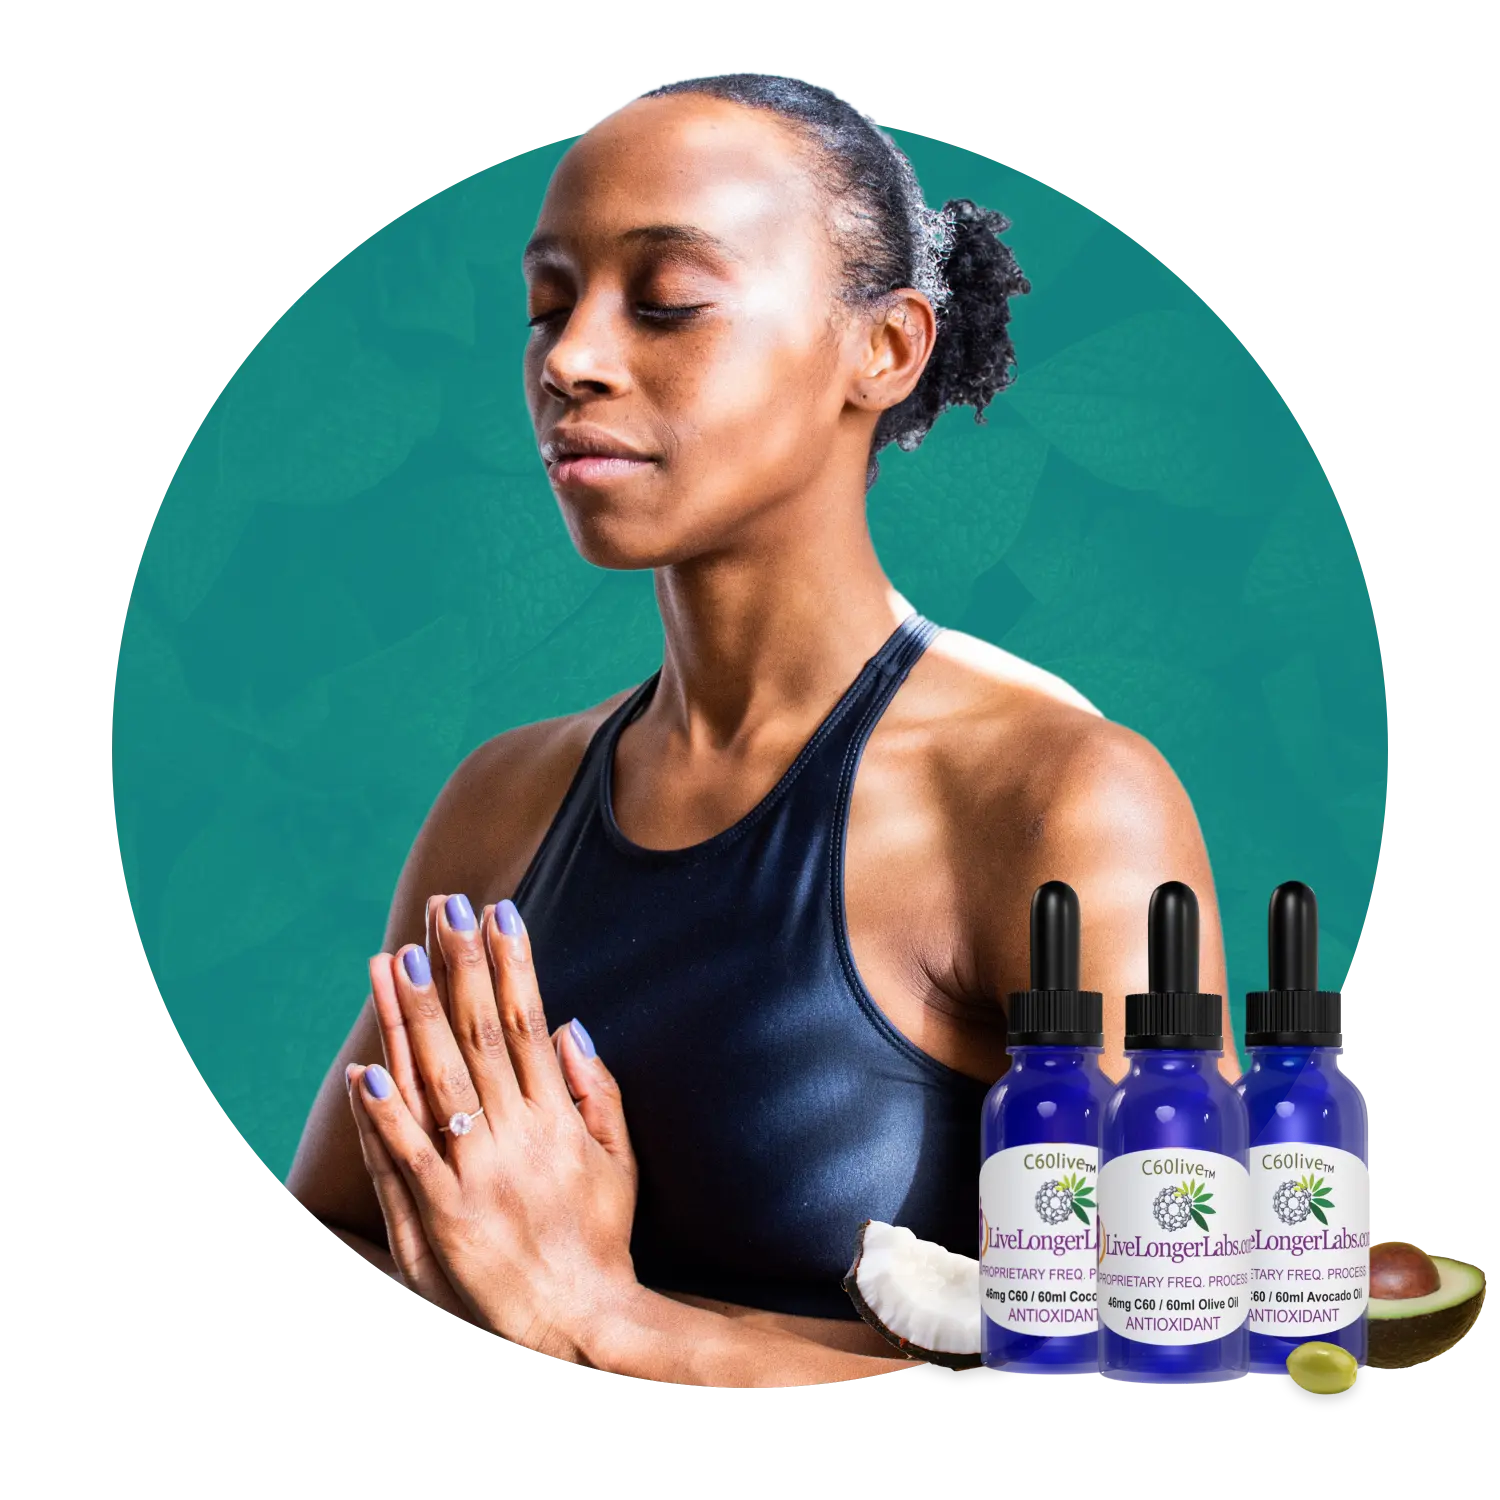 A woman in namaste hands closes her eyes in meditation with three bottles of C60 Avocado oil placed in front of her image.